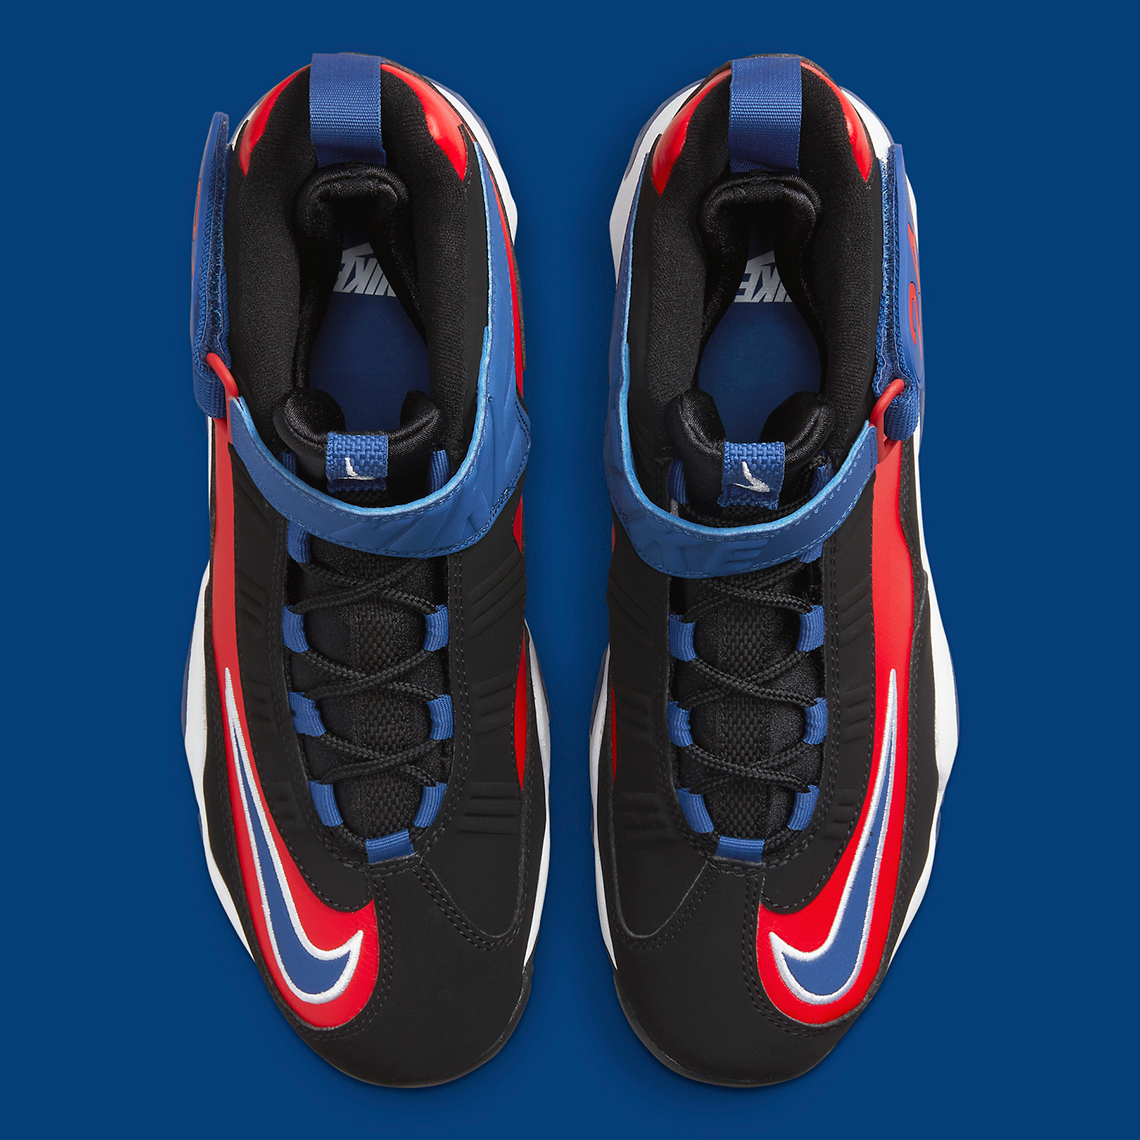 nike-air-griffey-max-1-navy-red-release-date-5.jpg